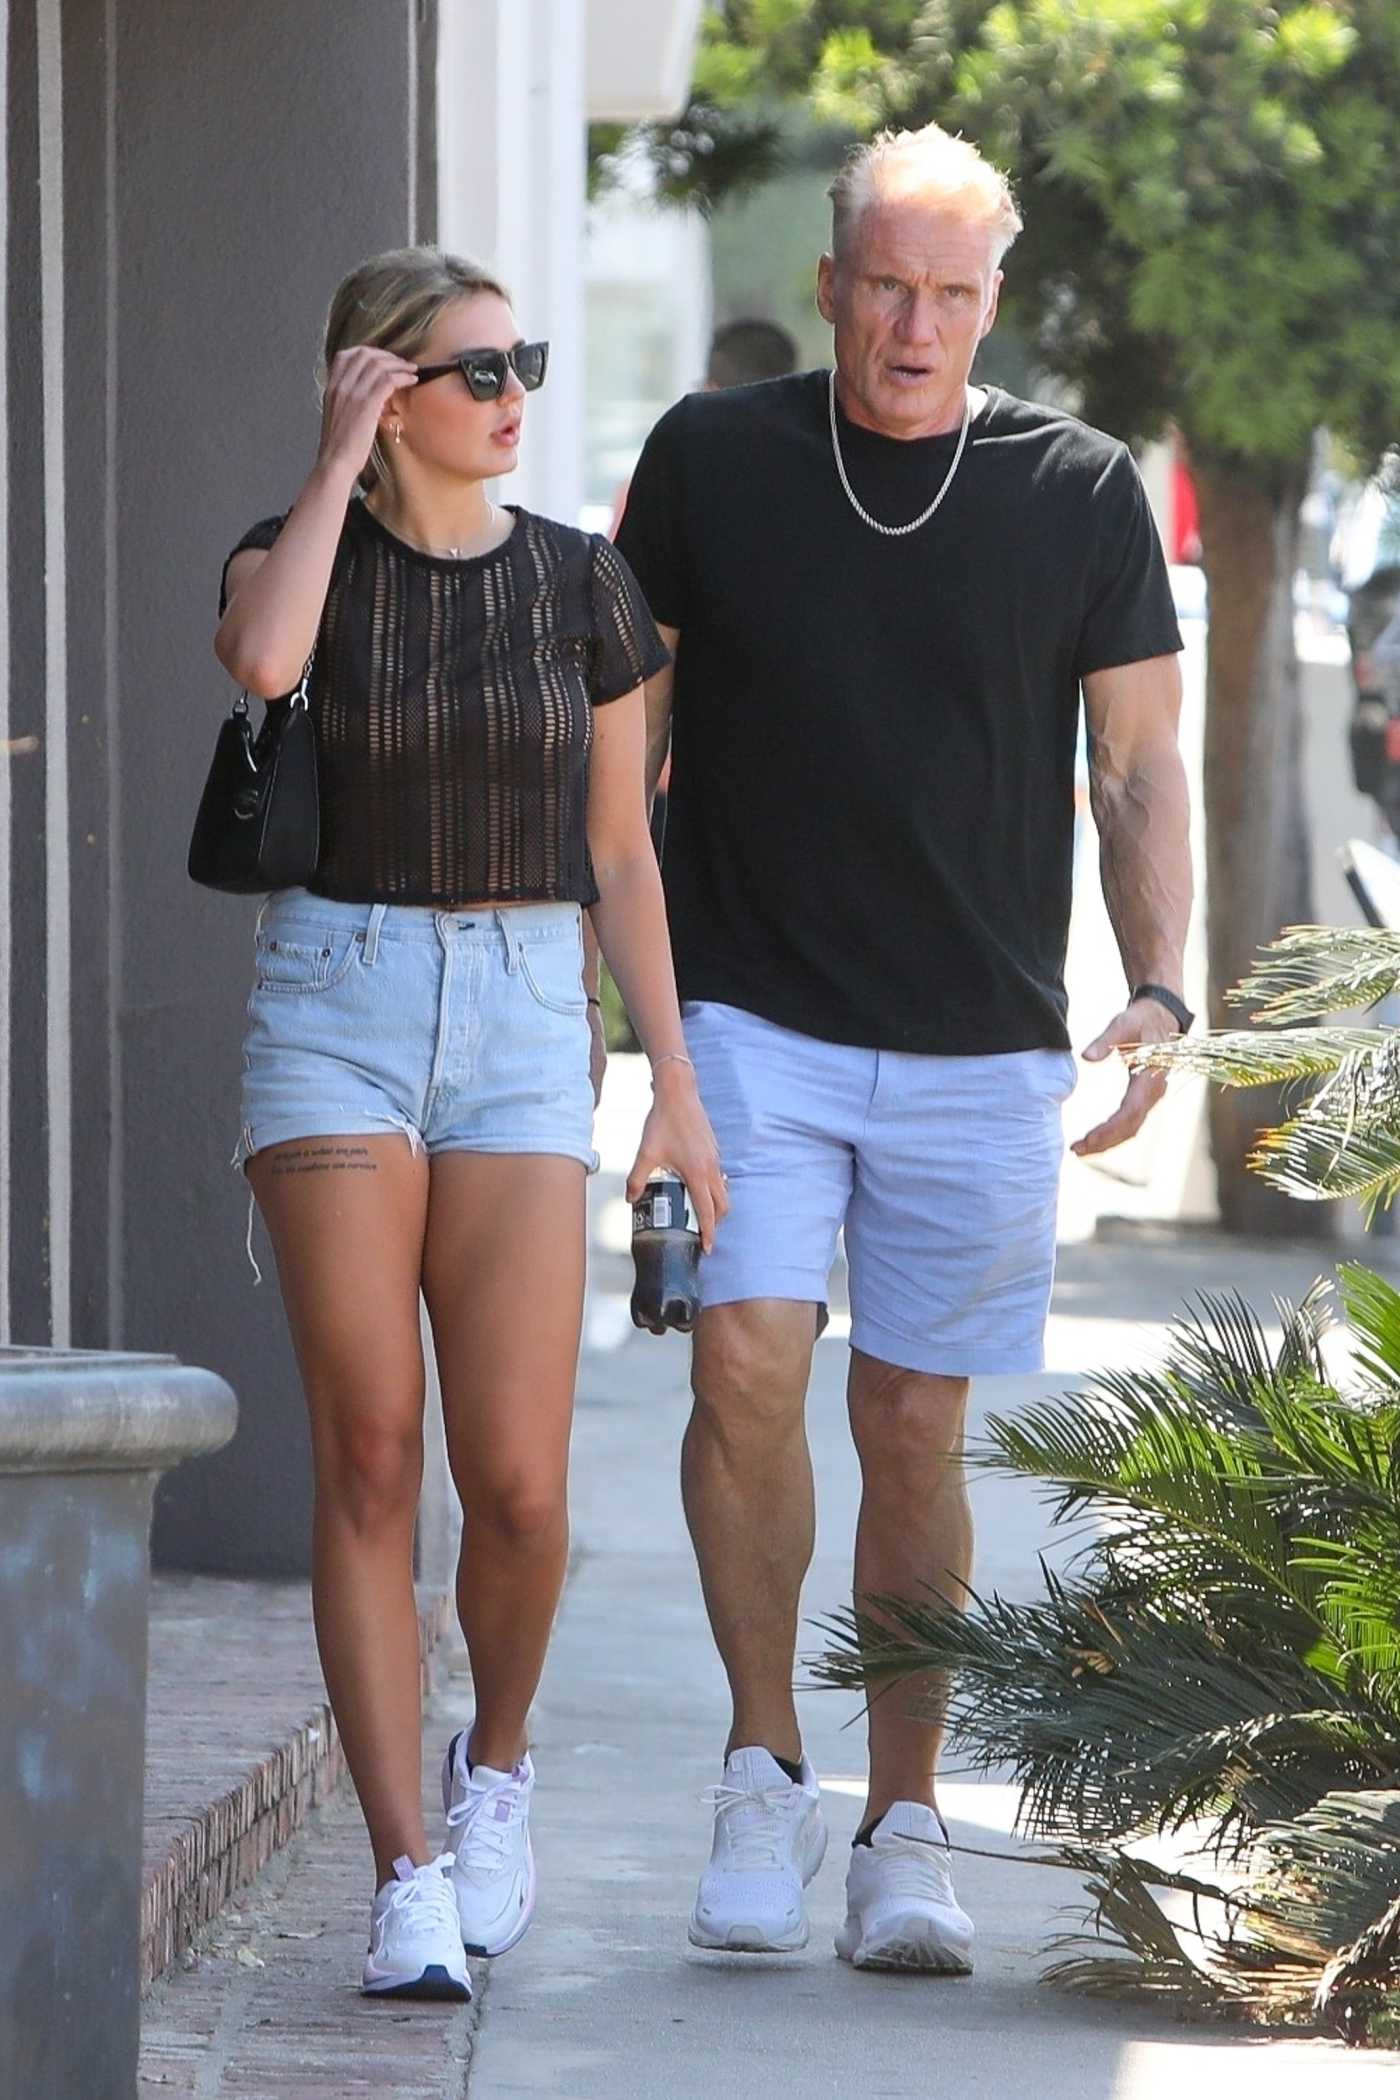 Dolph Lundgren in a Black Tee Was Seen Out with Emma Krokdal in Los Angeles 06/03/2021